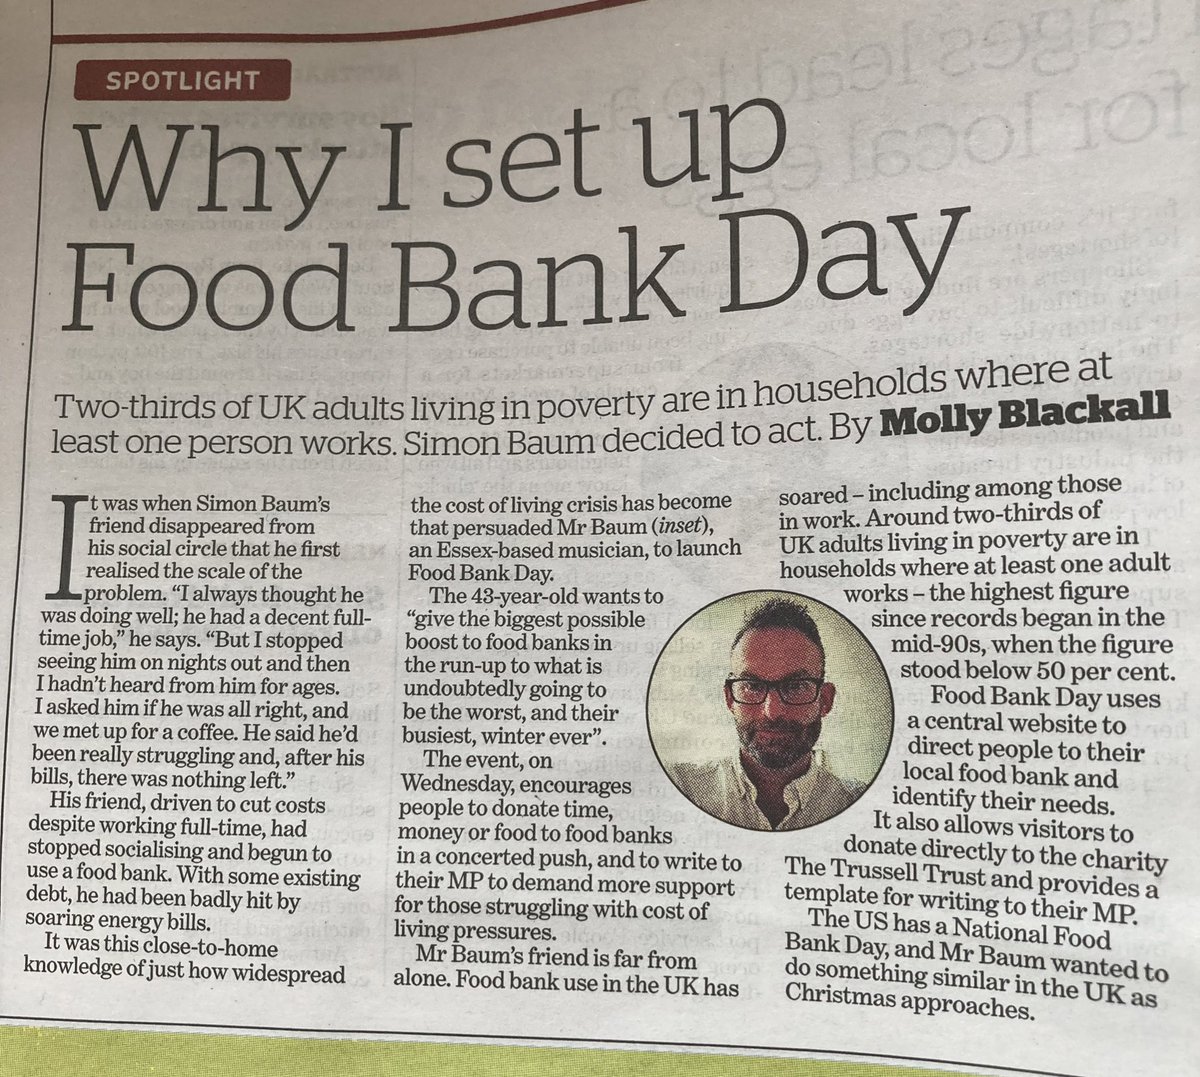 An explanation of today’s action from its founder @SimonBaumMusic. Please join in & help spread the word, this really is an emergency. #FoodBankDayNov30 #FoodPoverty #ToriesOut146